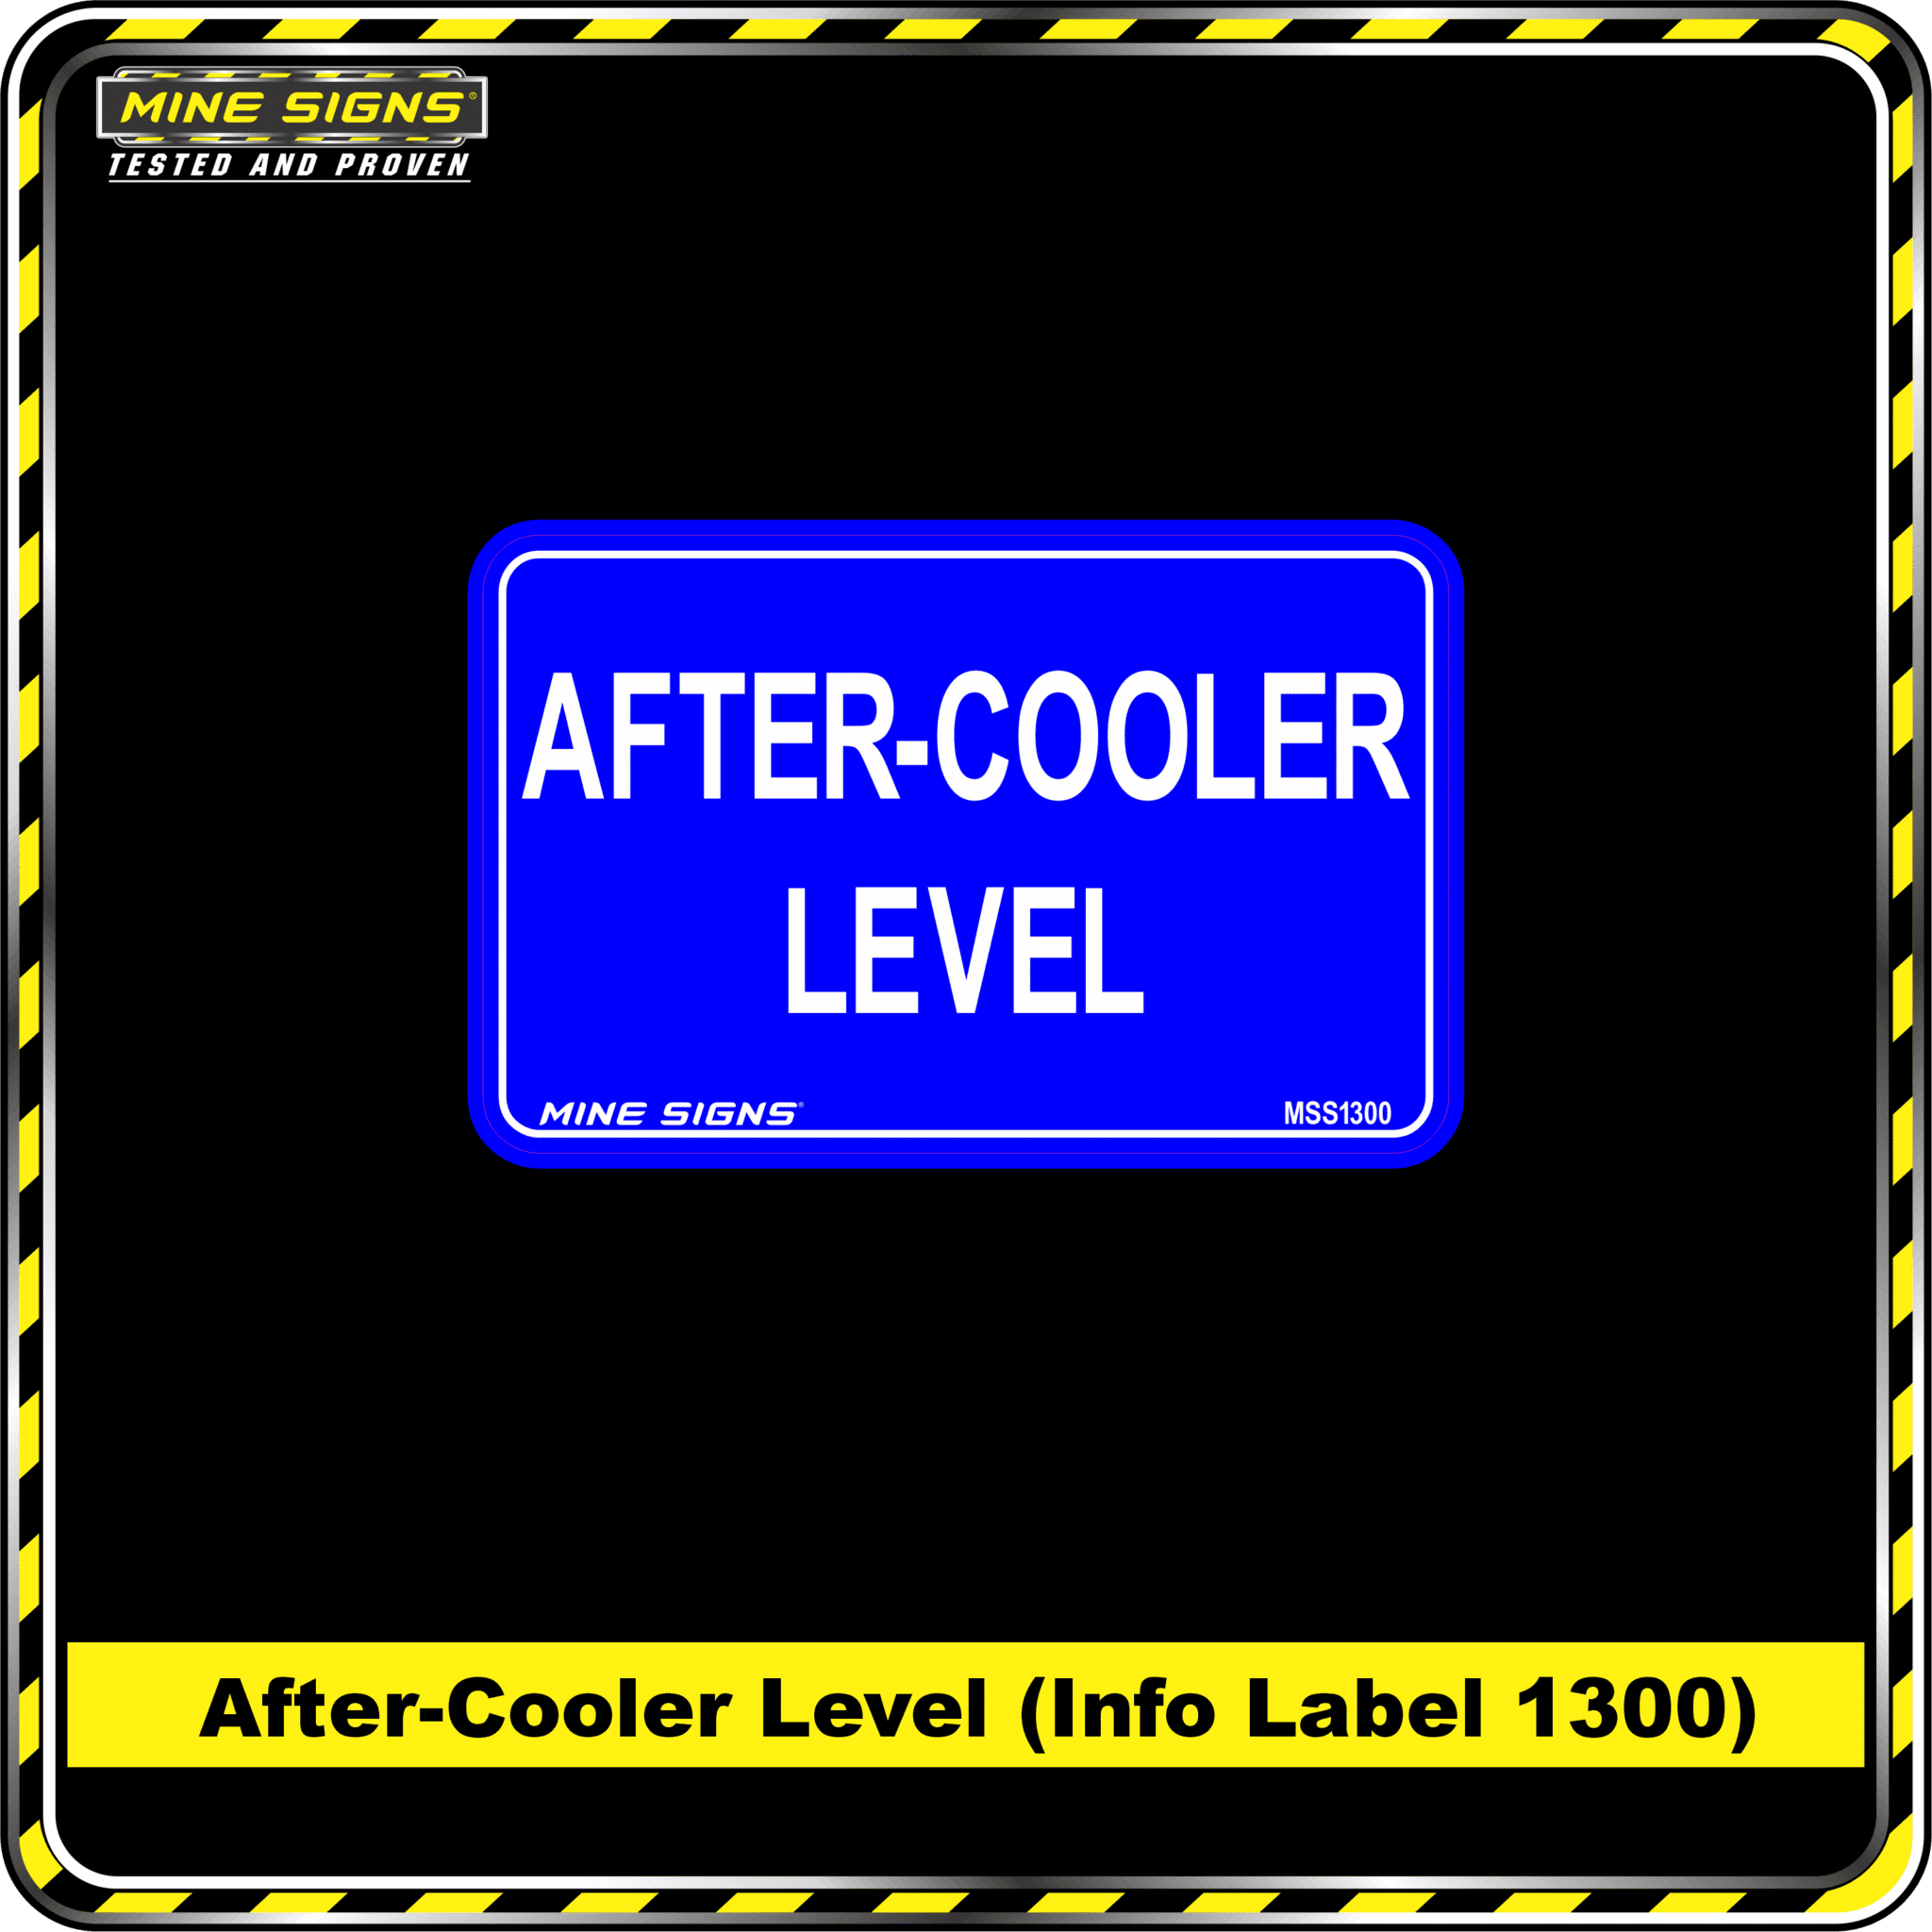 MS - Product Background - Safety Signs - After Cooler Level 1300